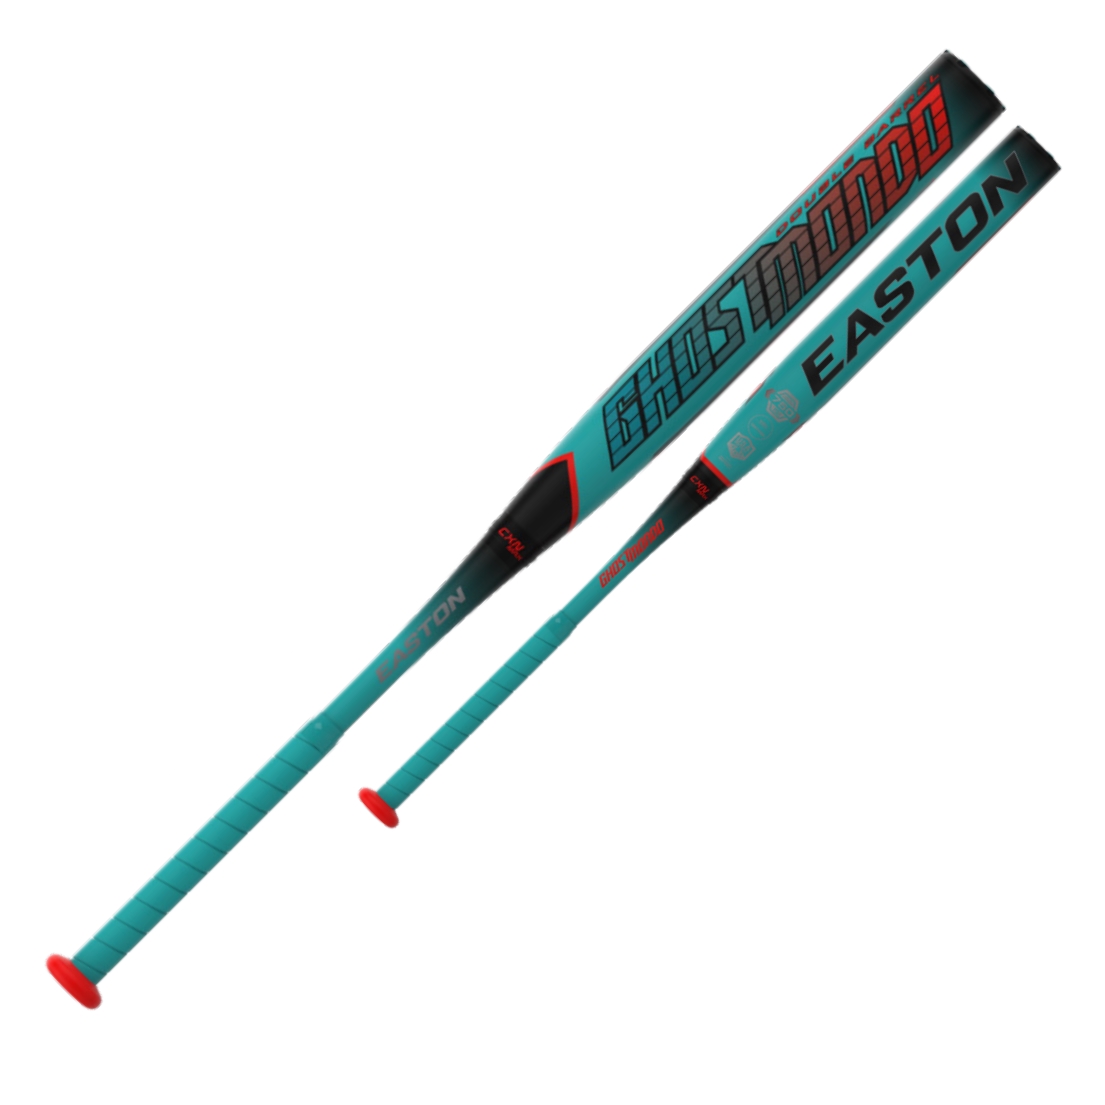 easton-ghostmondo-ext-12-5-load-usa-softball-bat-34-inch-28-oz SP22GHML-3428 Easton 628412361603 <p>Double Barrel Technology – Delivers soft barrel compression and hot performance